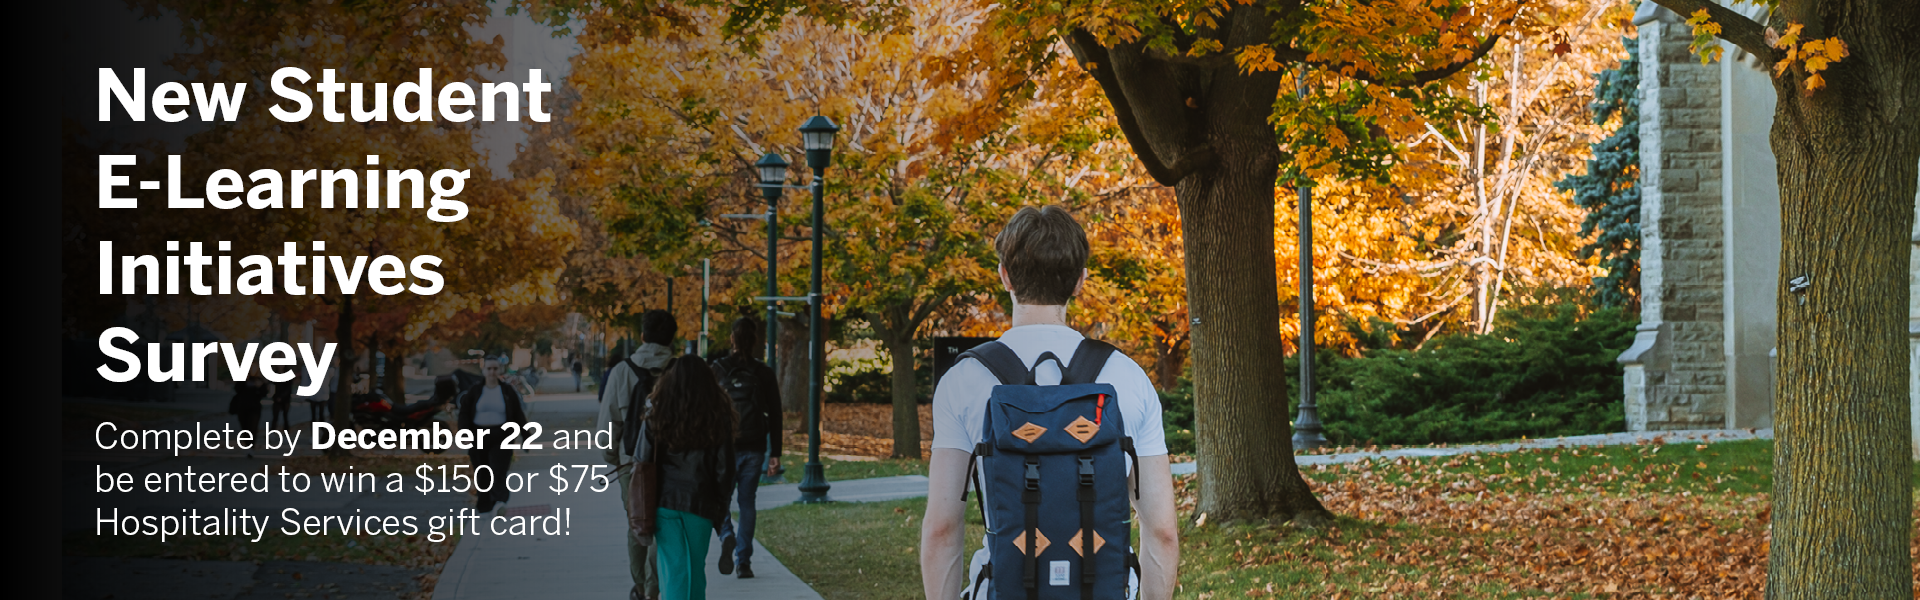 Students walking on campus on a sunny autumn day with white text reading New Student E-Learning Initiatives Survey. Complete by December 22 and be entered to win a $150 or $75 Hospitality Services gift card!